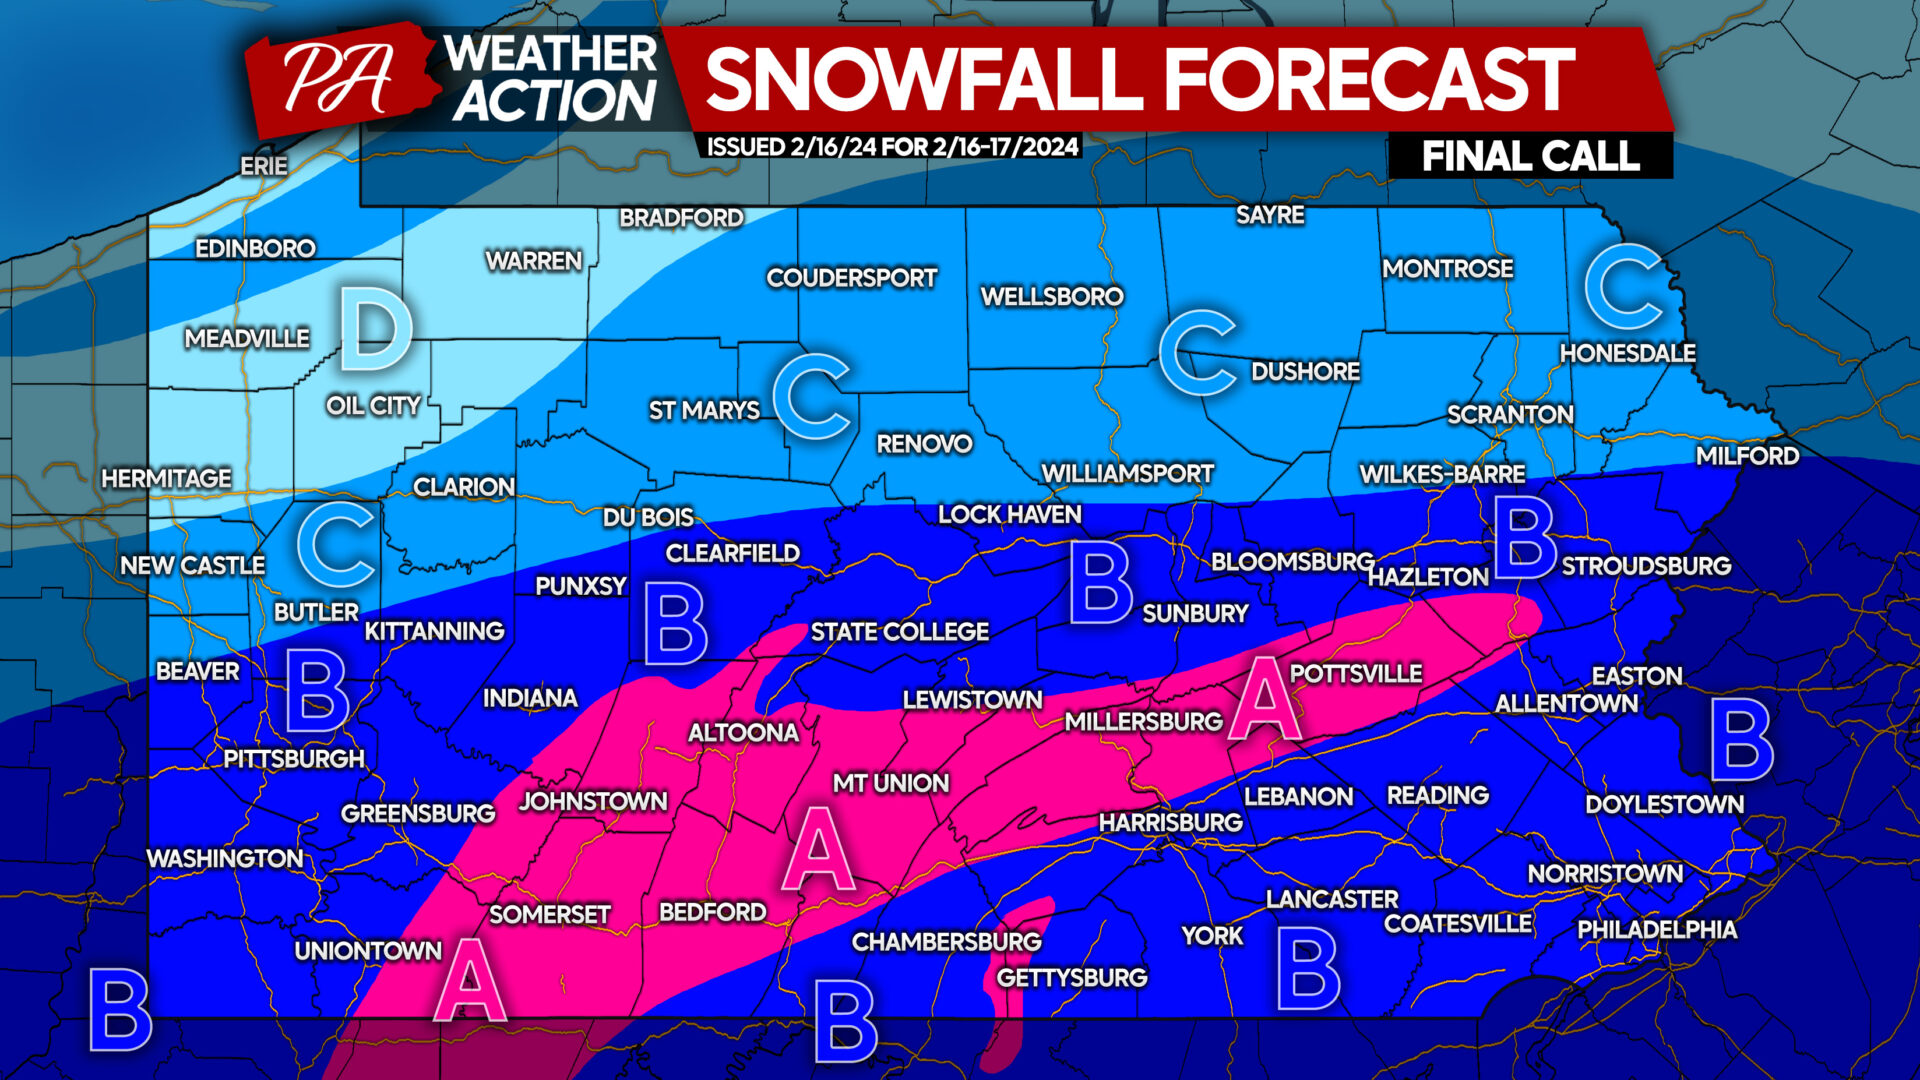 Snowfall Amounts Increased Across Pennsylvania in Final Call Forecast for Tonight’s Snowstorm